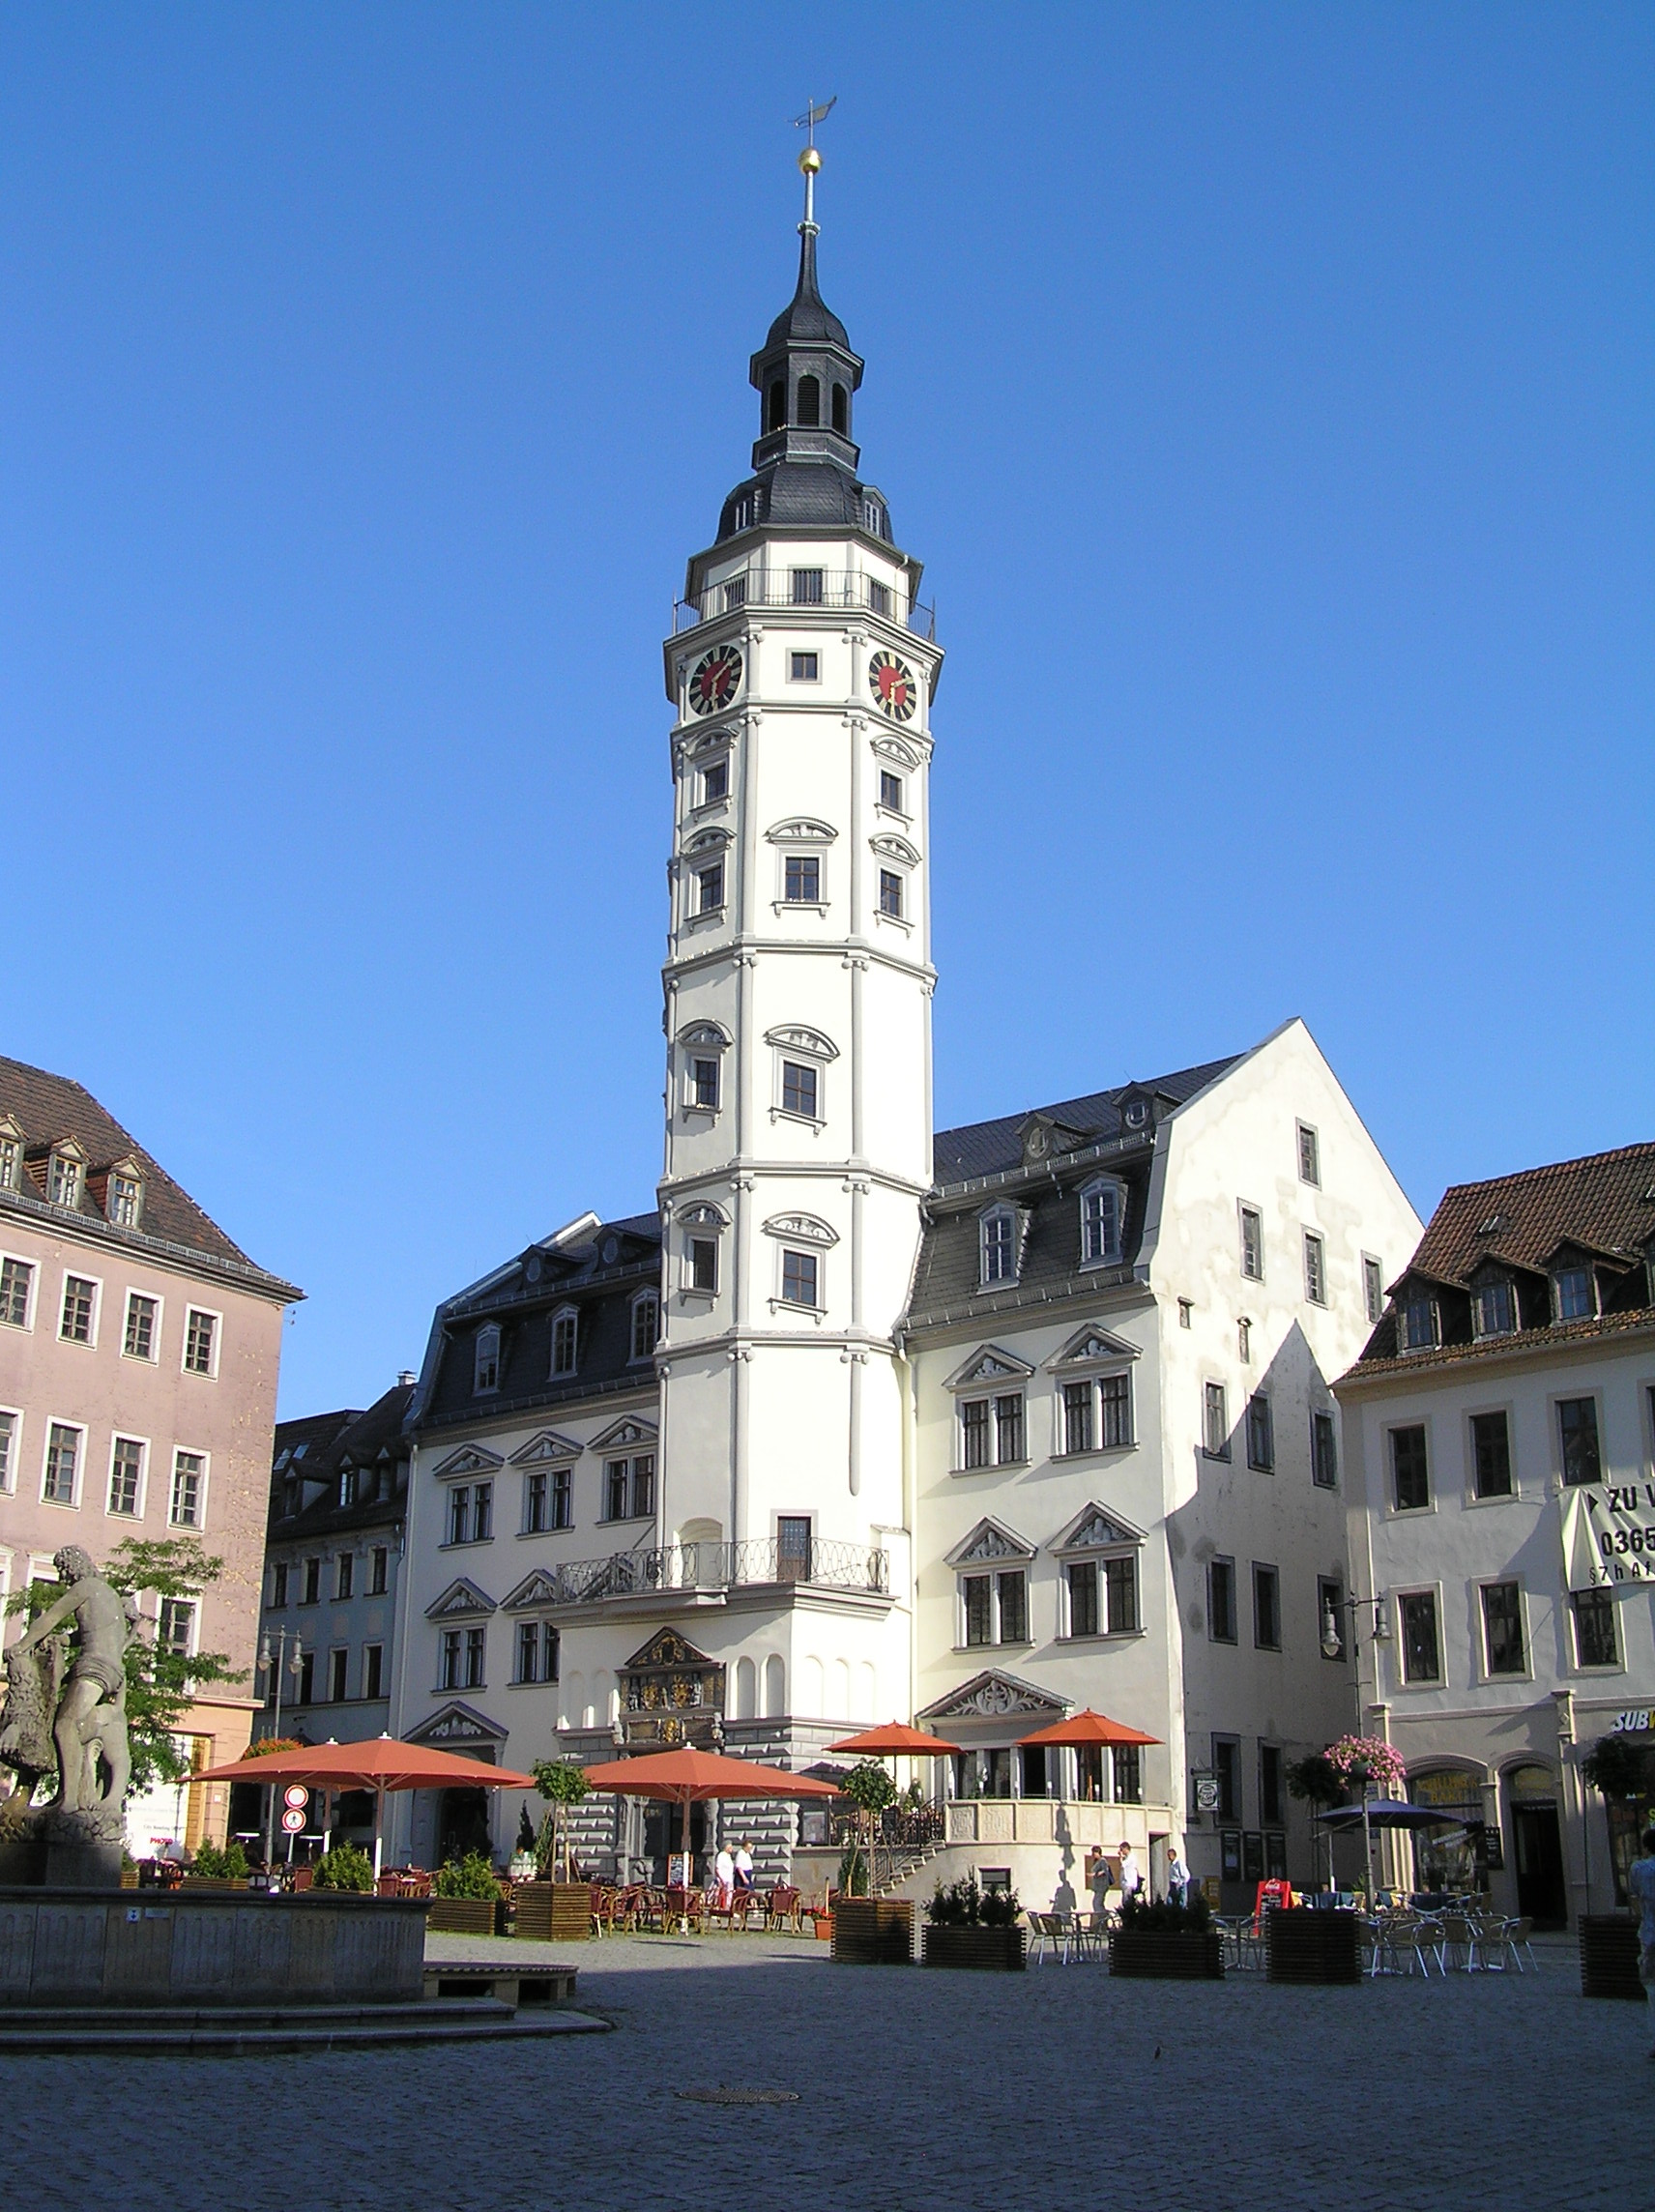 "Gera, rathaus" by H2k4 - Own work. Licensed under CC BY-SA 3.0 via Wikimedia Commons - https://commons.wikimedia.org/wiki/File:Gera,_rathaus.JPG#/media/File:Gera,_rathaus.JPG